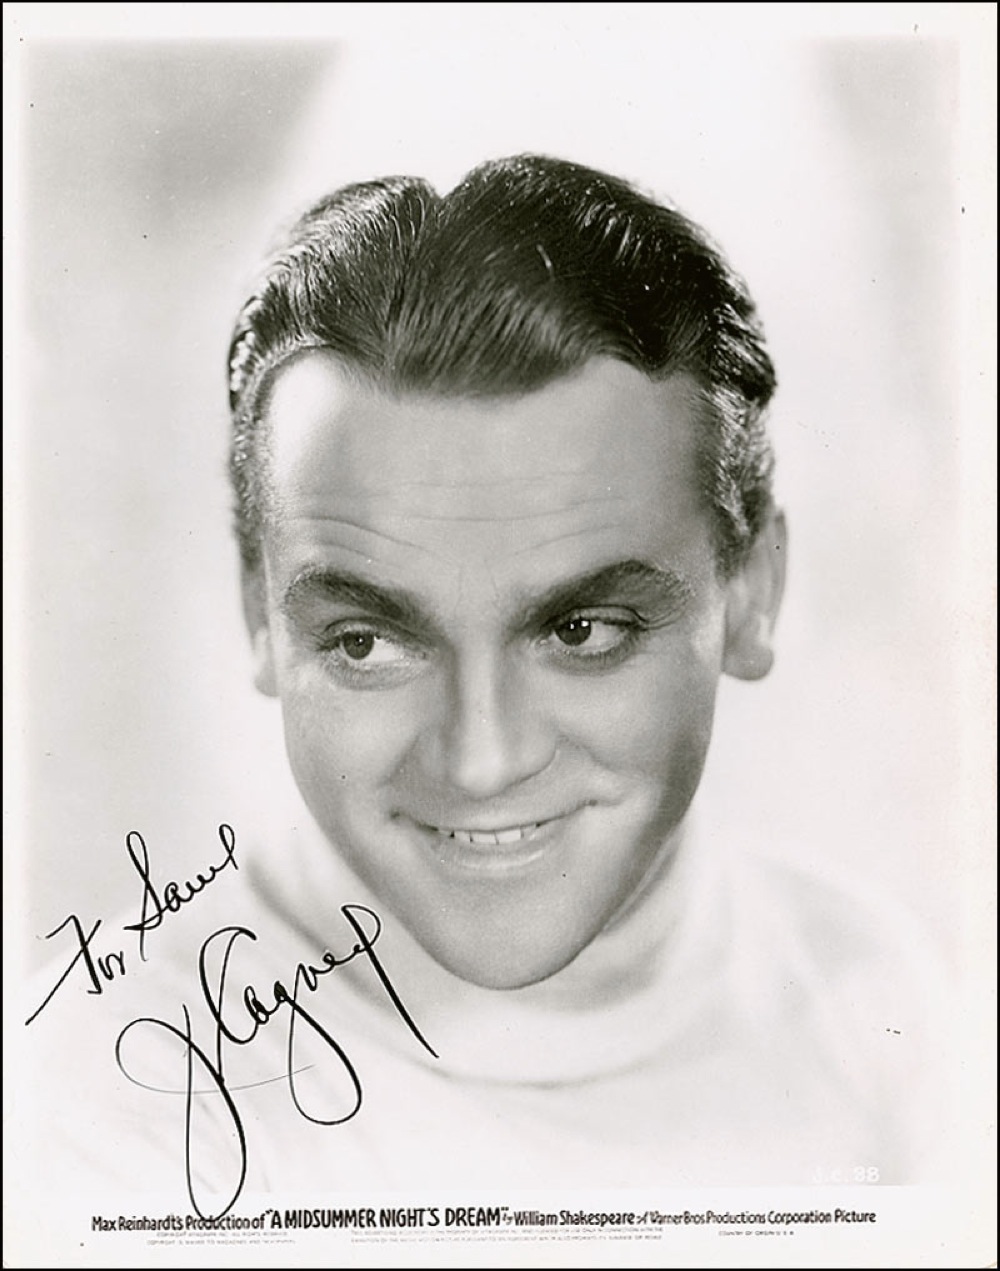 Lot #26 James Cagney